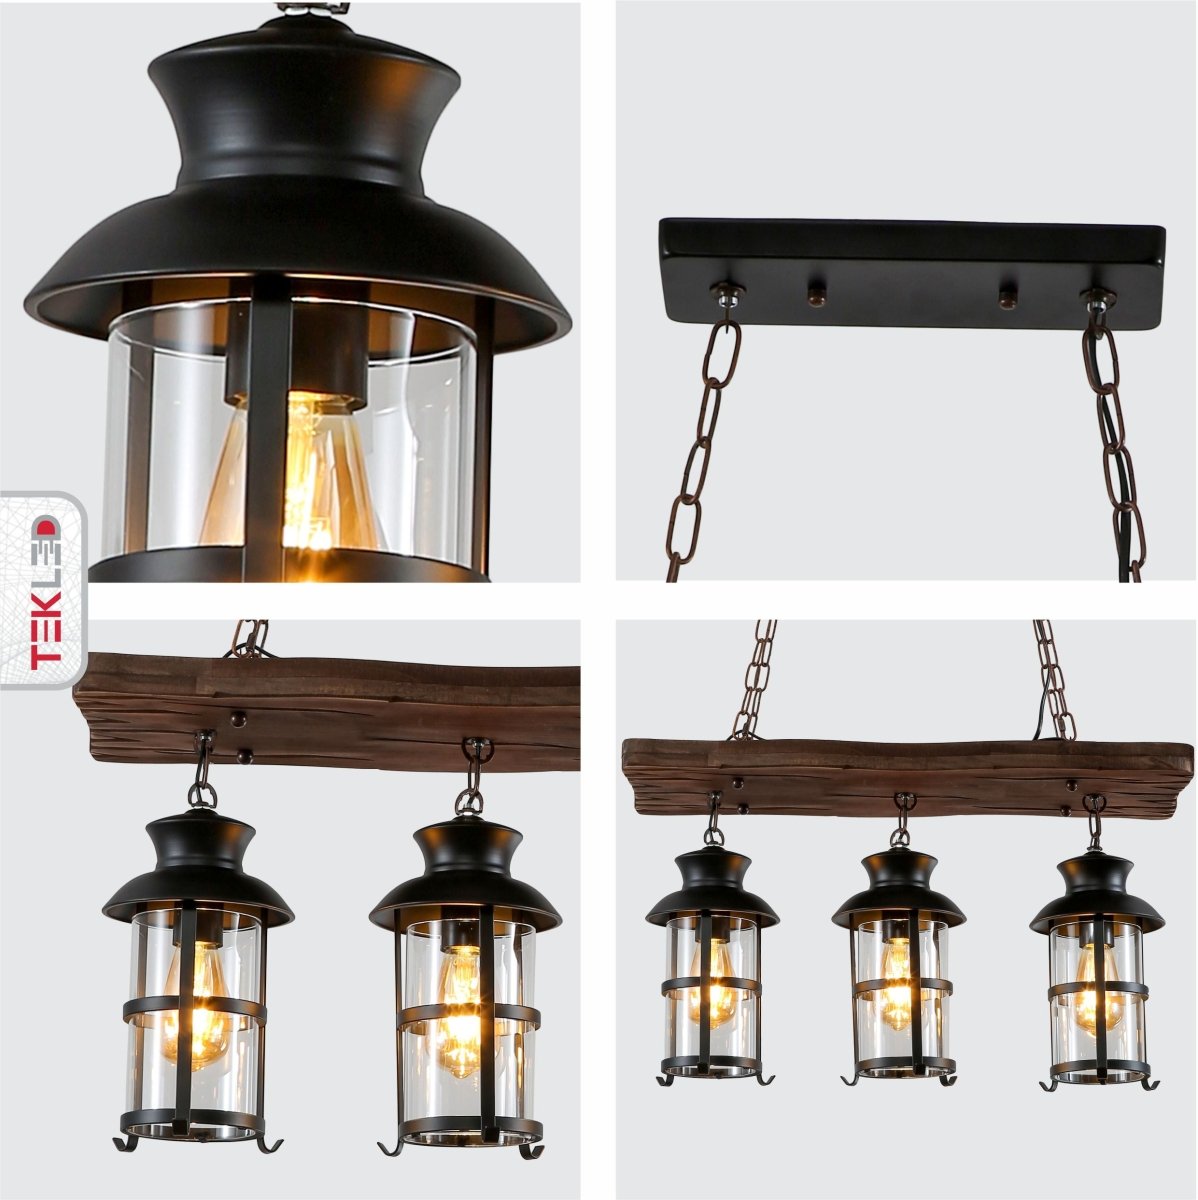 Detailed shots of Board Iron and Wood Glass Cylinder Shade Island Chandelier Light 3xE27 | TEKLED 159-17840